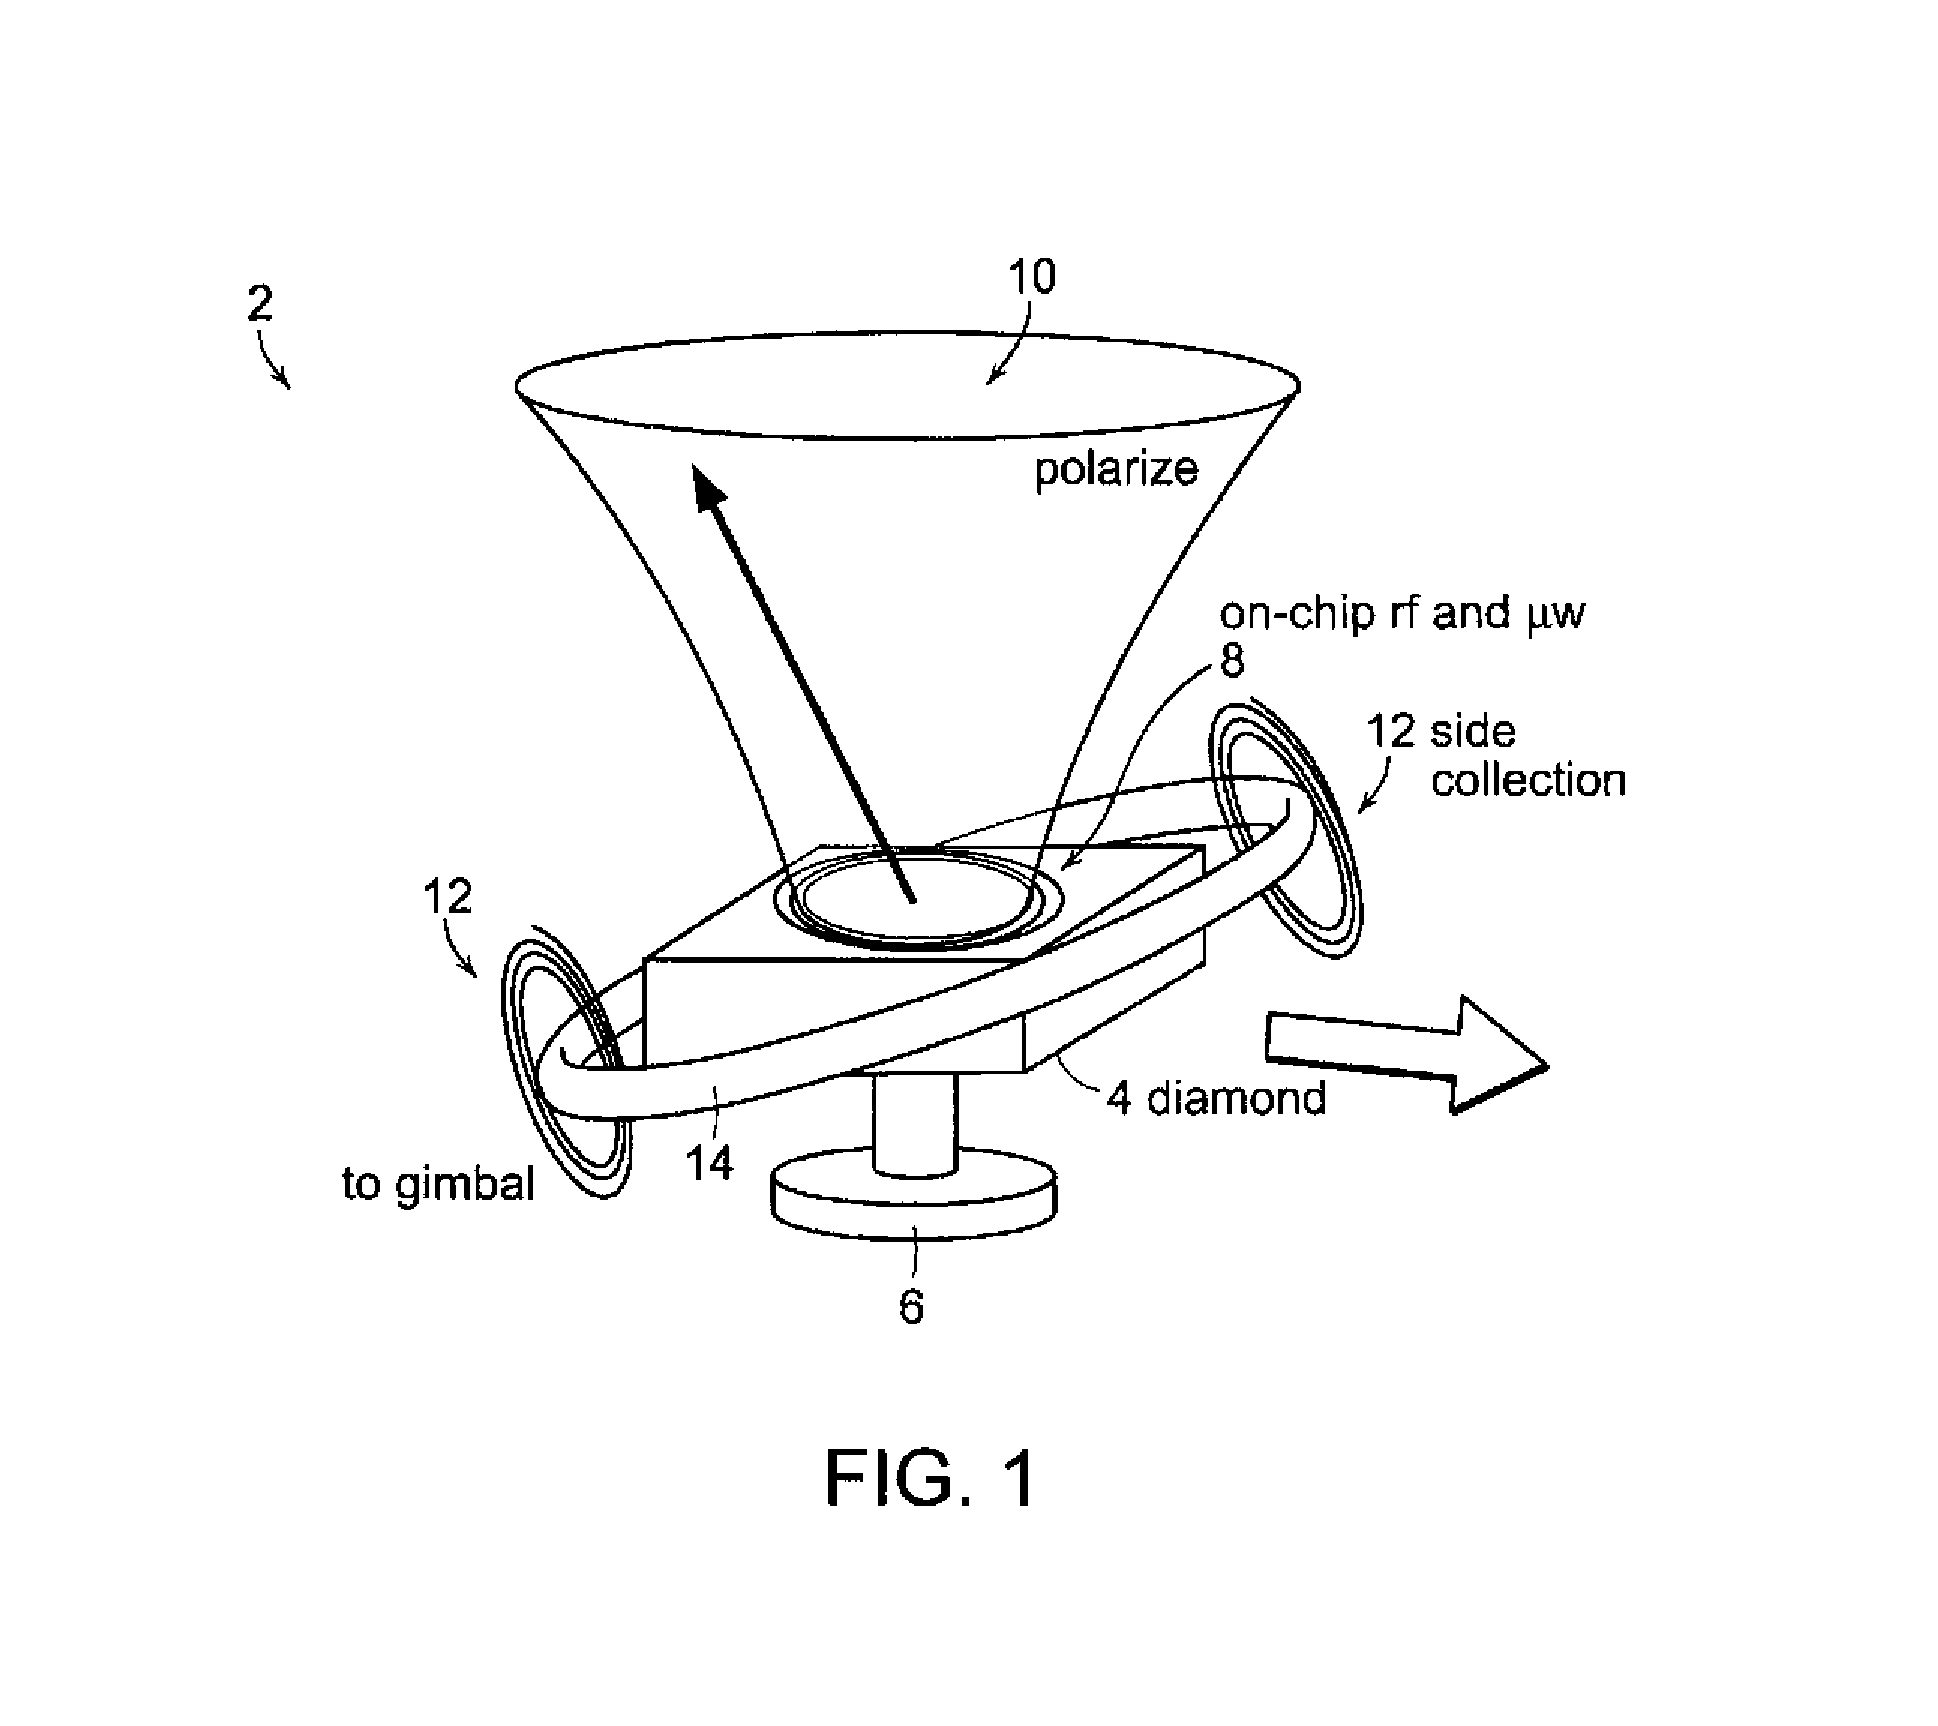 Stable three-axis nuclear spin gyroscope